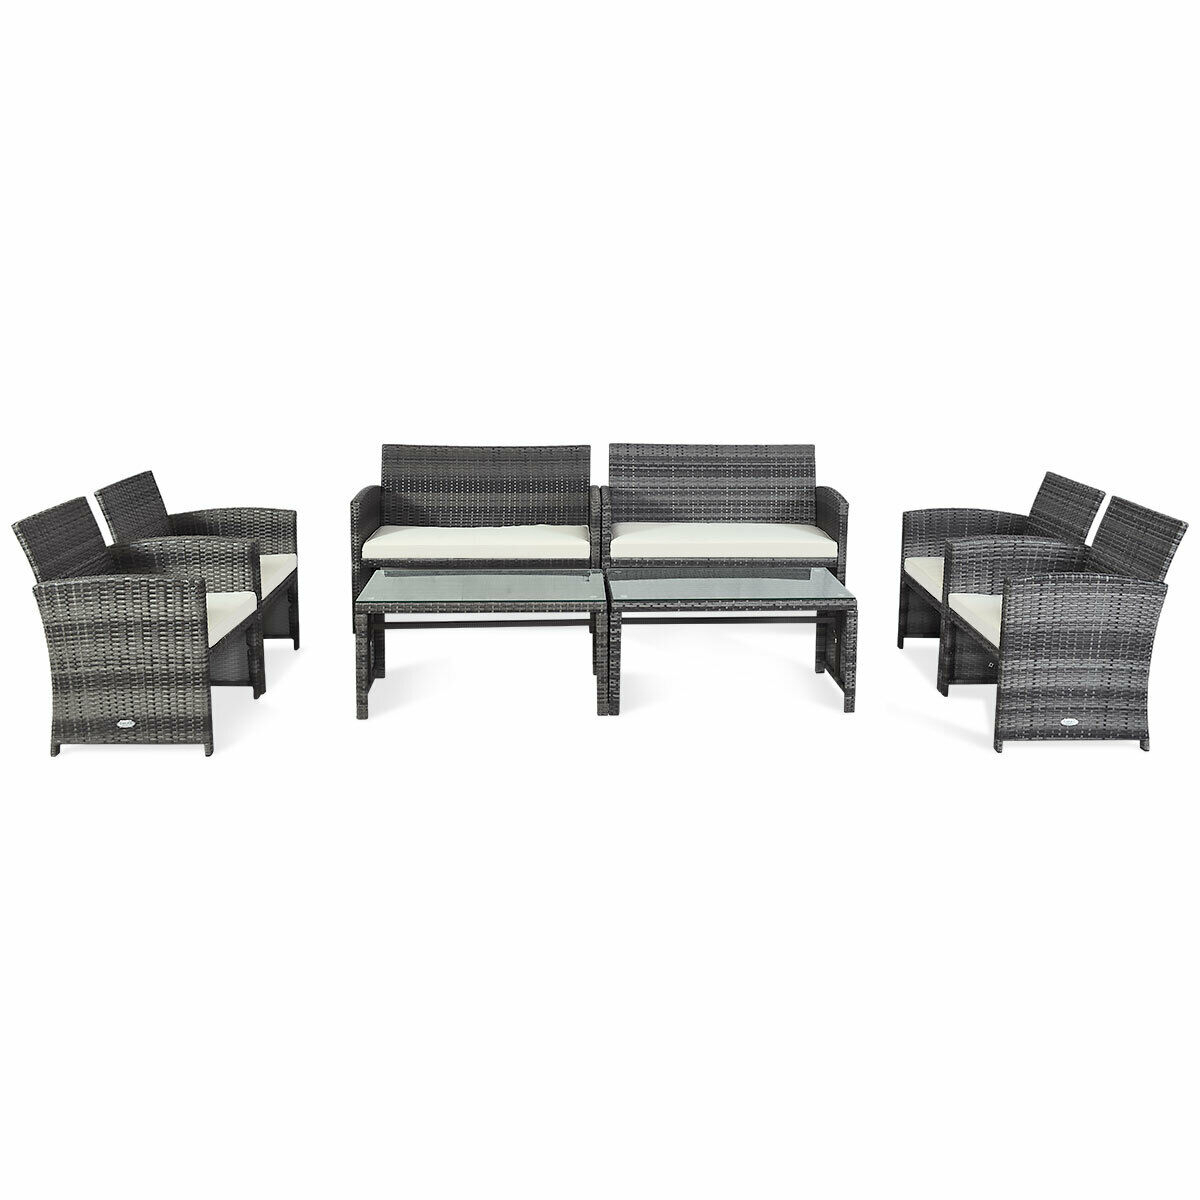 8PCS Patio Outdoor Rattan Furniture Set W/ Cushioned Chair Loveseat Table